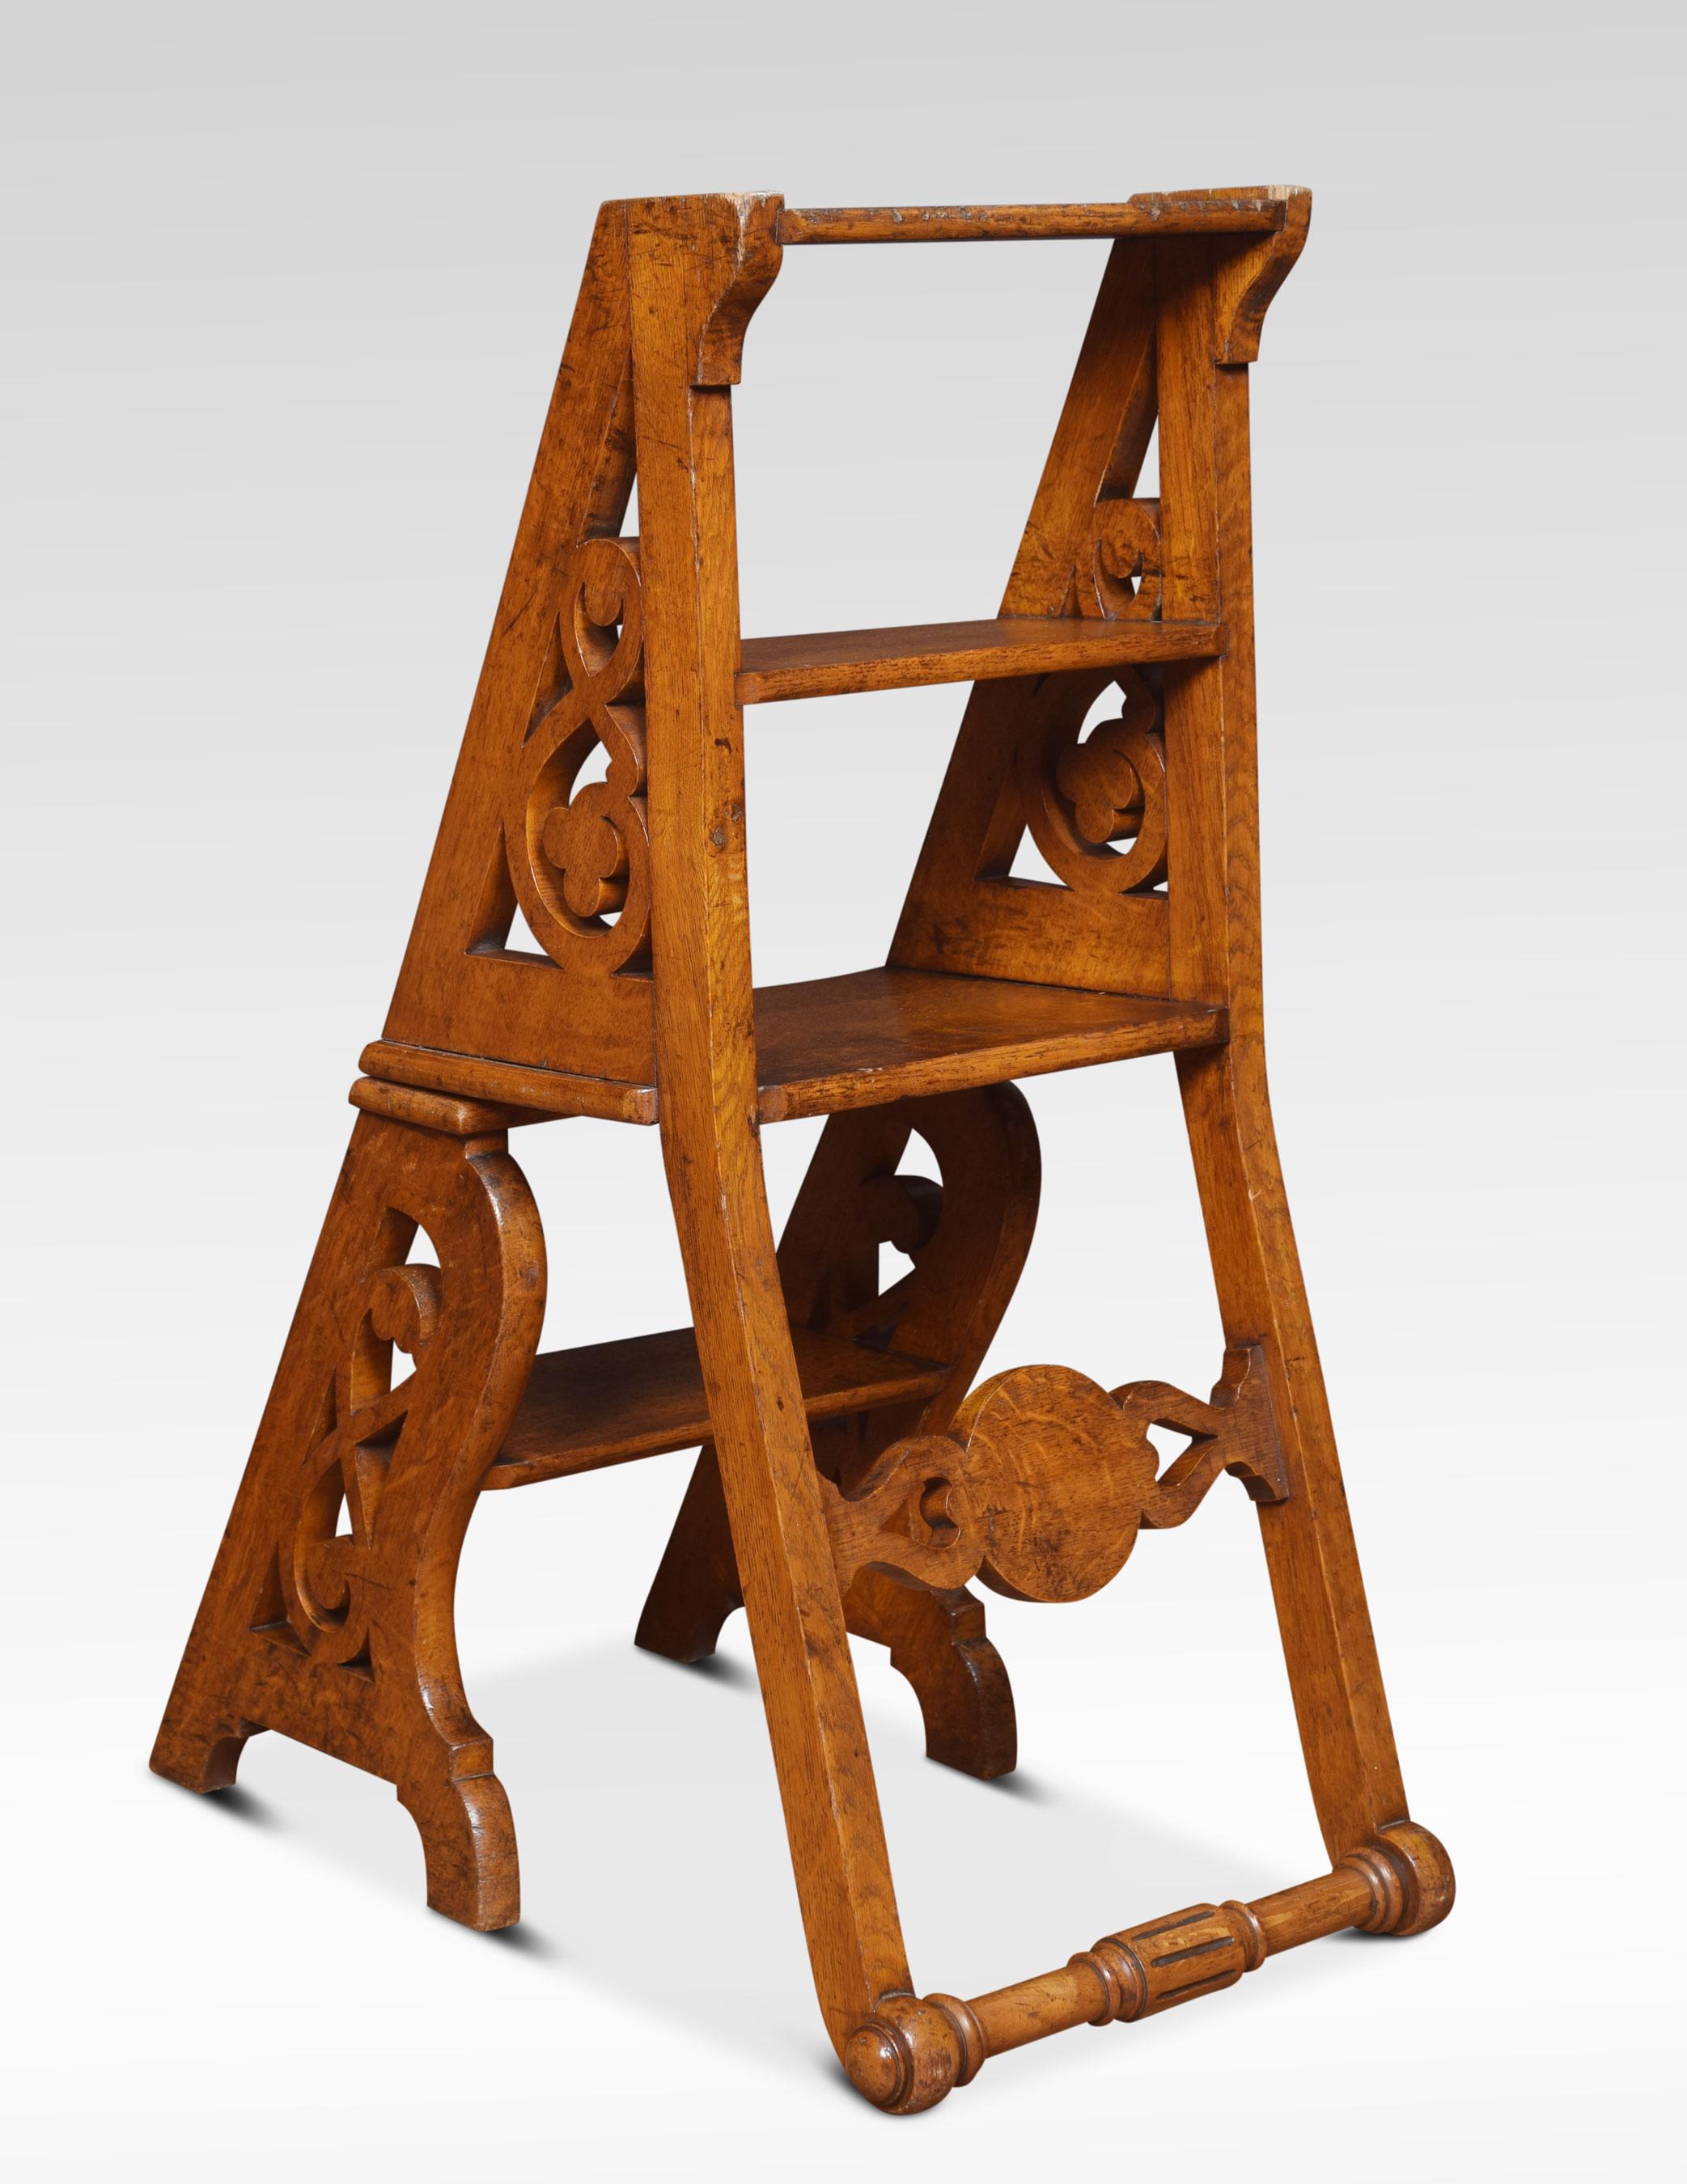 Oak metamorphic library steps/chair, the carved centre rail inscribed with initials K.J with a solid oak seat above pierced scroll supports with foliate decoration. The chair opens into a sturdy set of Library steps.
Dimensions
Height 35.5